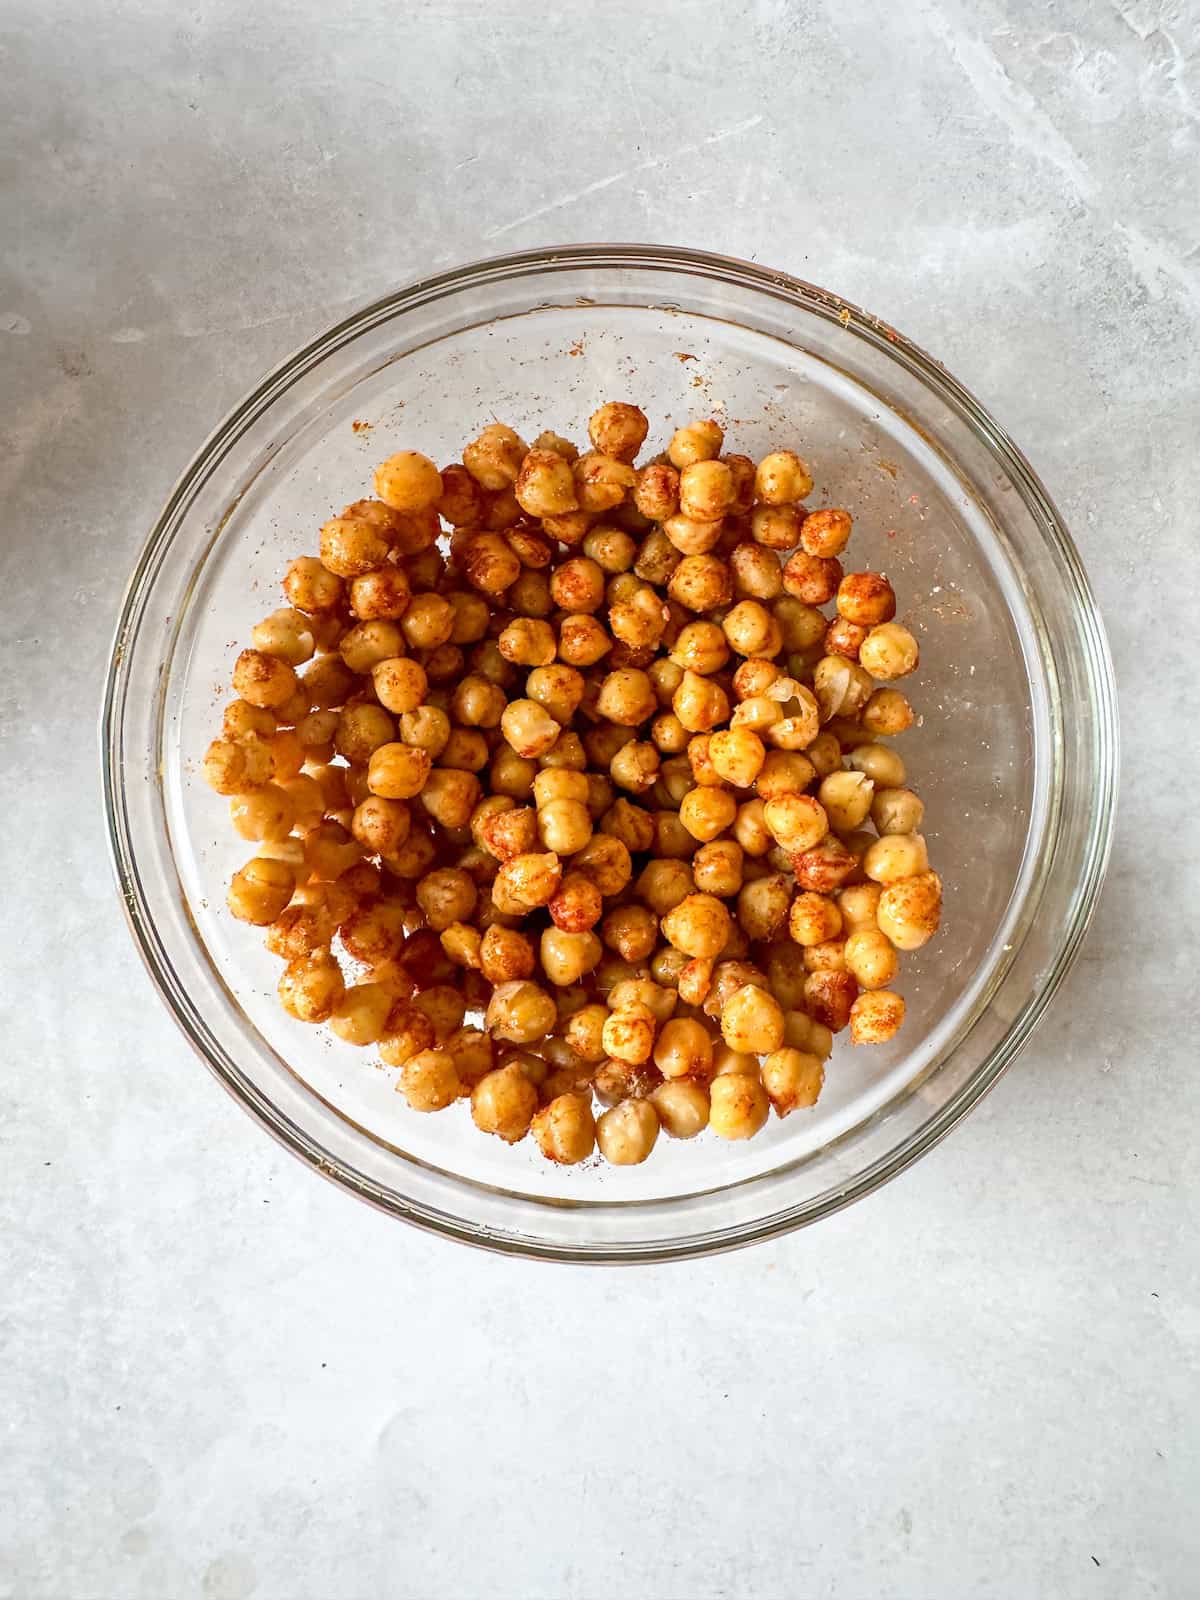 Chickpeas seasoned with spices in a glass bowl.